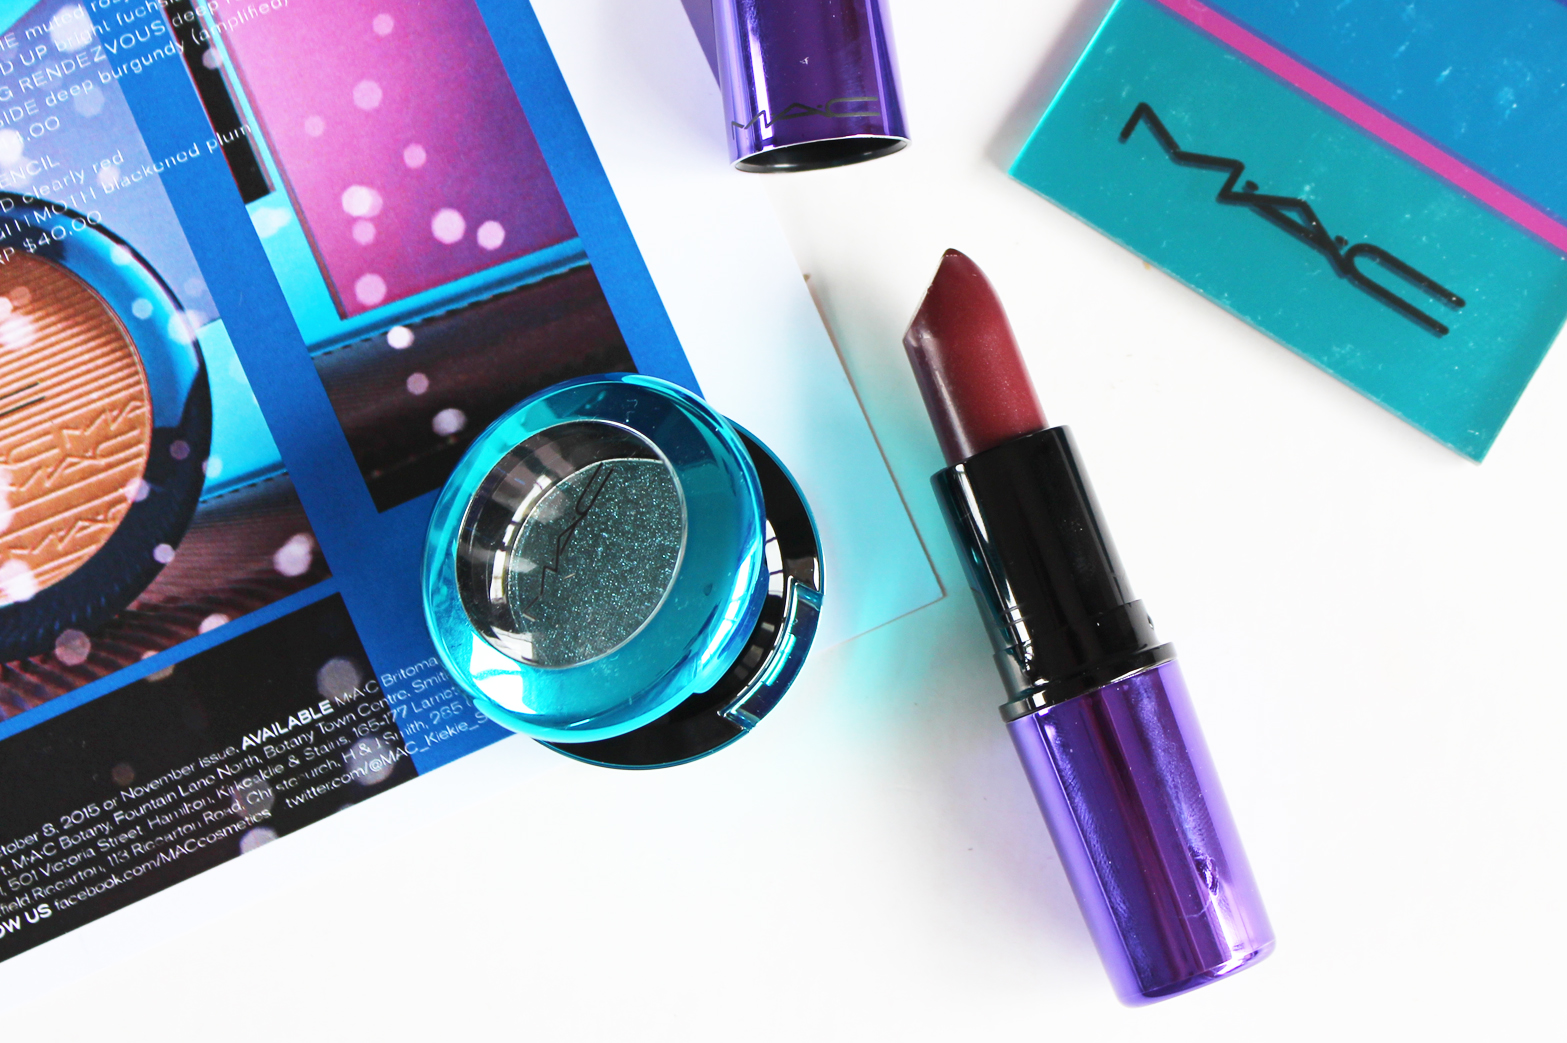 M.A.C | Magic Of The Night Holiday 2015 Collection - Review + Swatches - CassandraMyee